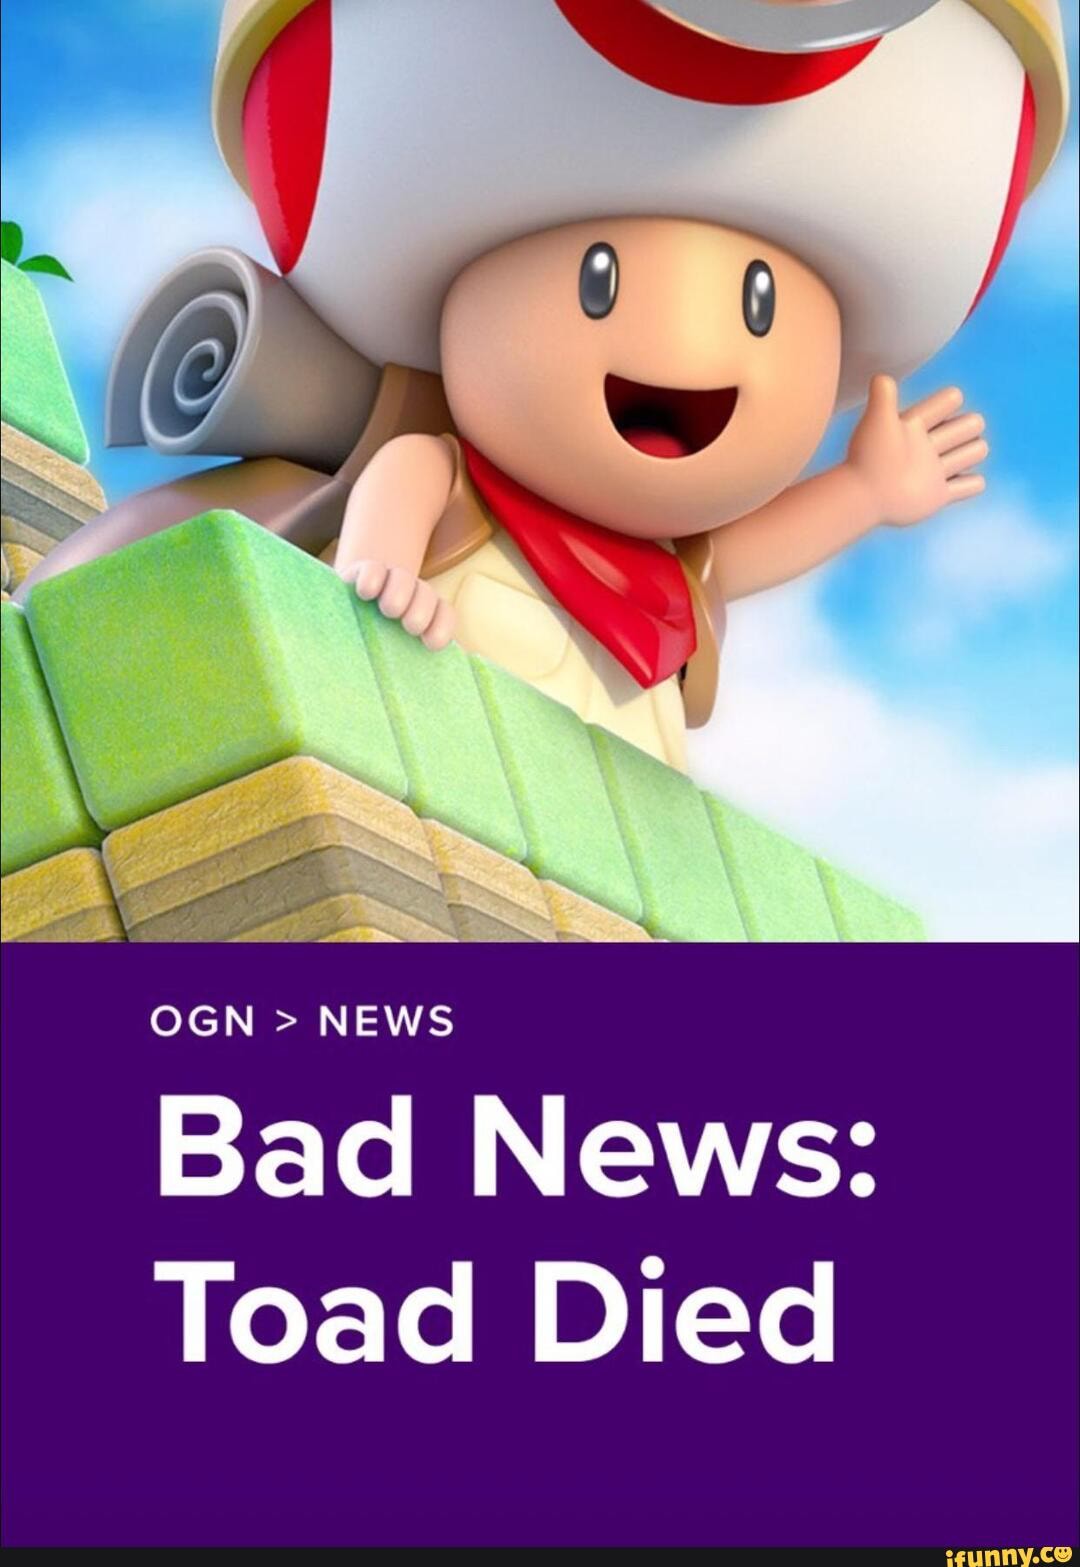 Bad News: Toad Died.